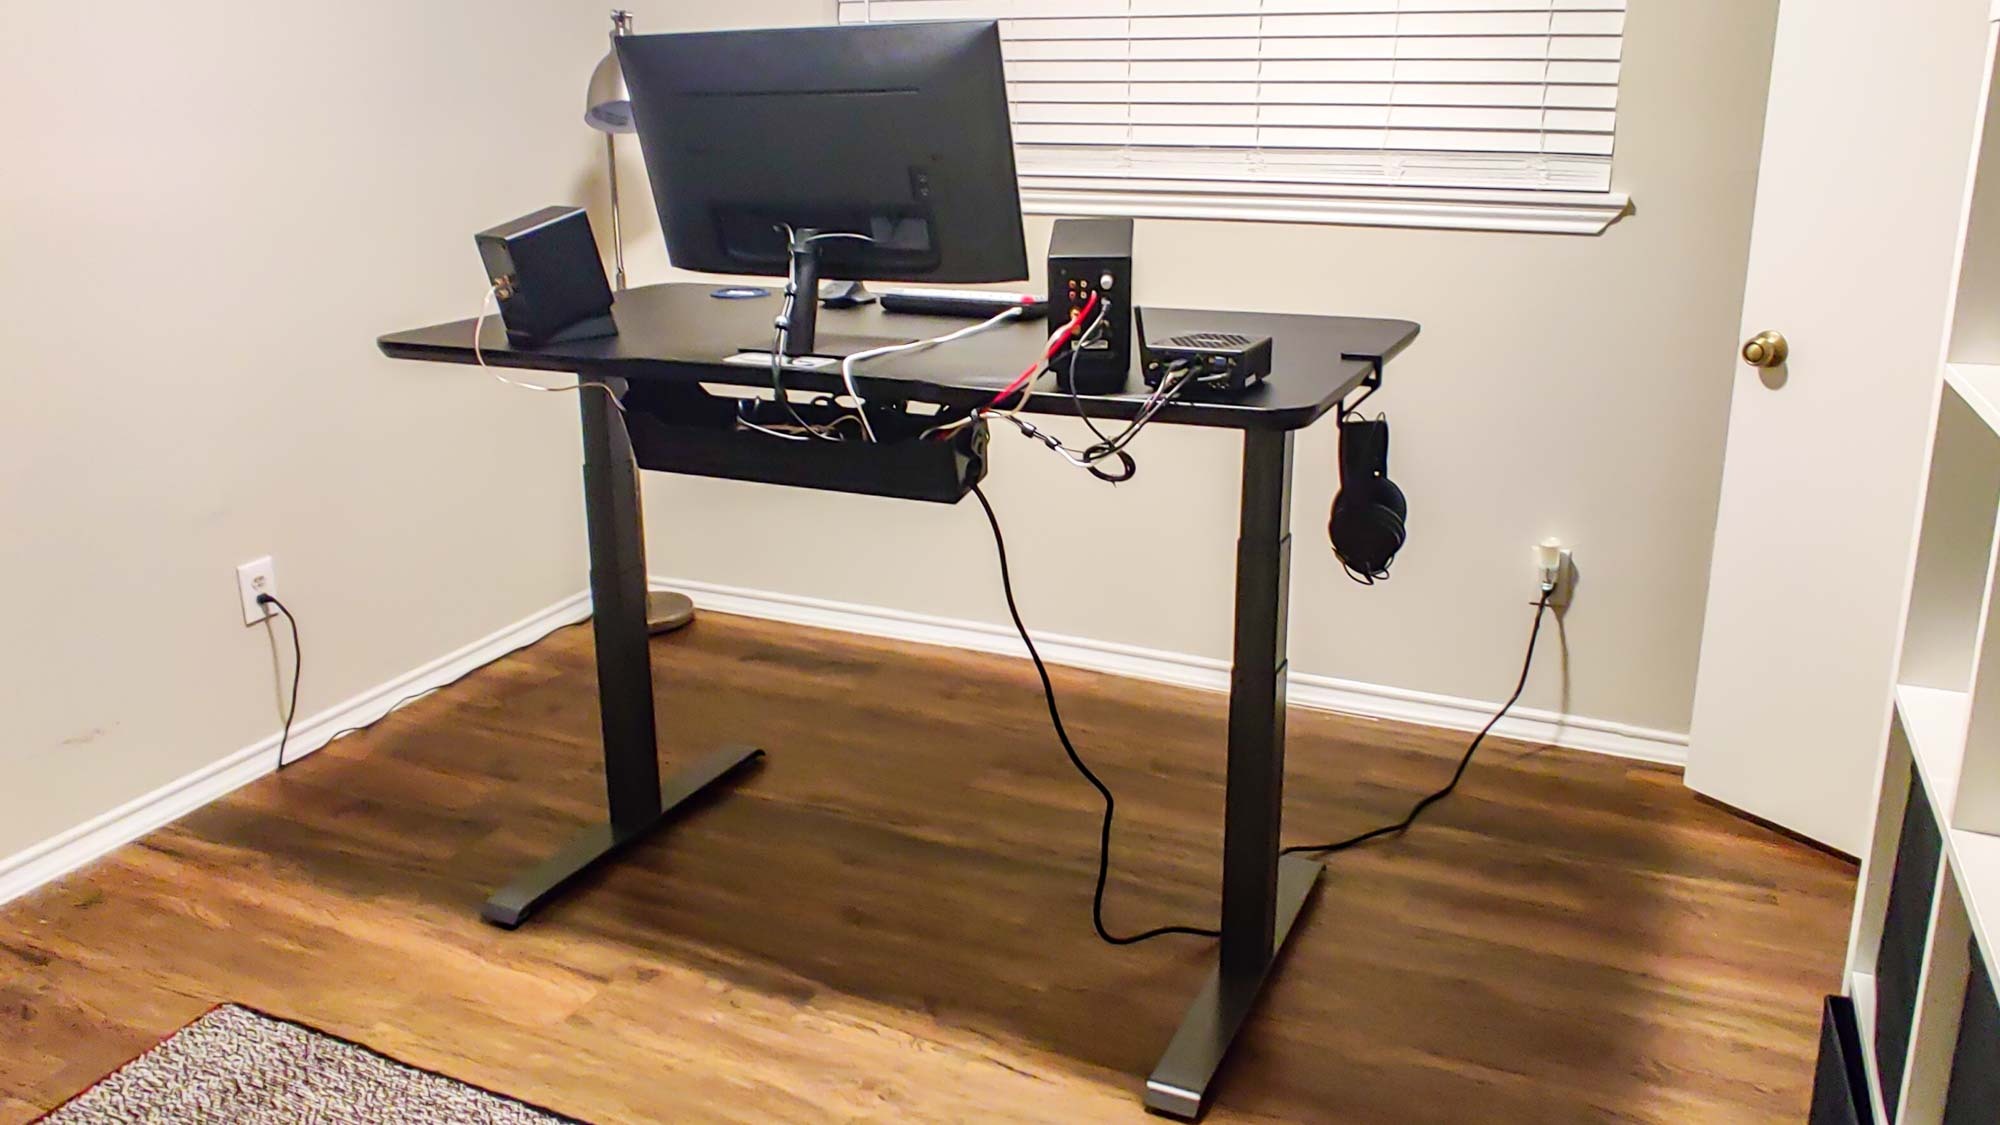 A Vari Electric Standing desk with a cable management tray